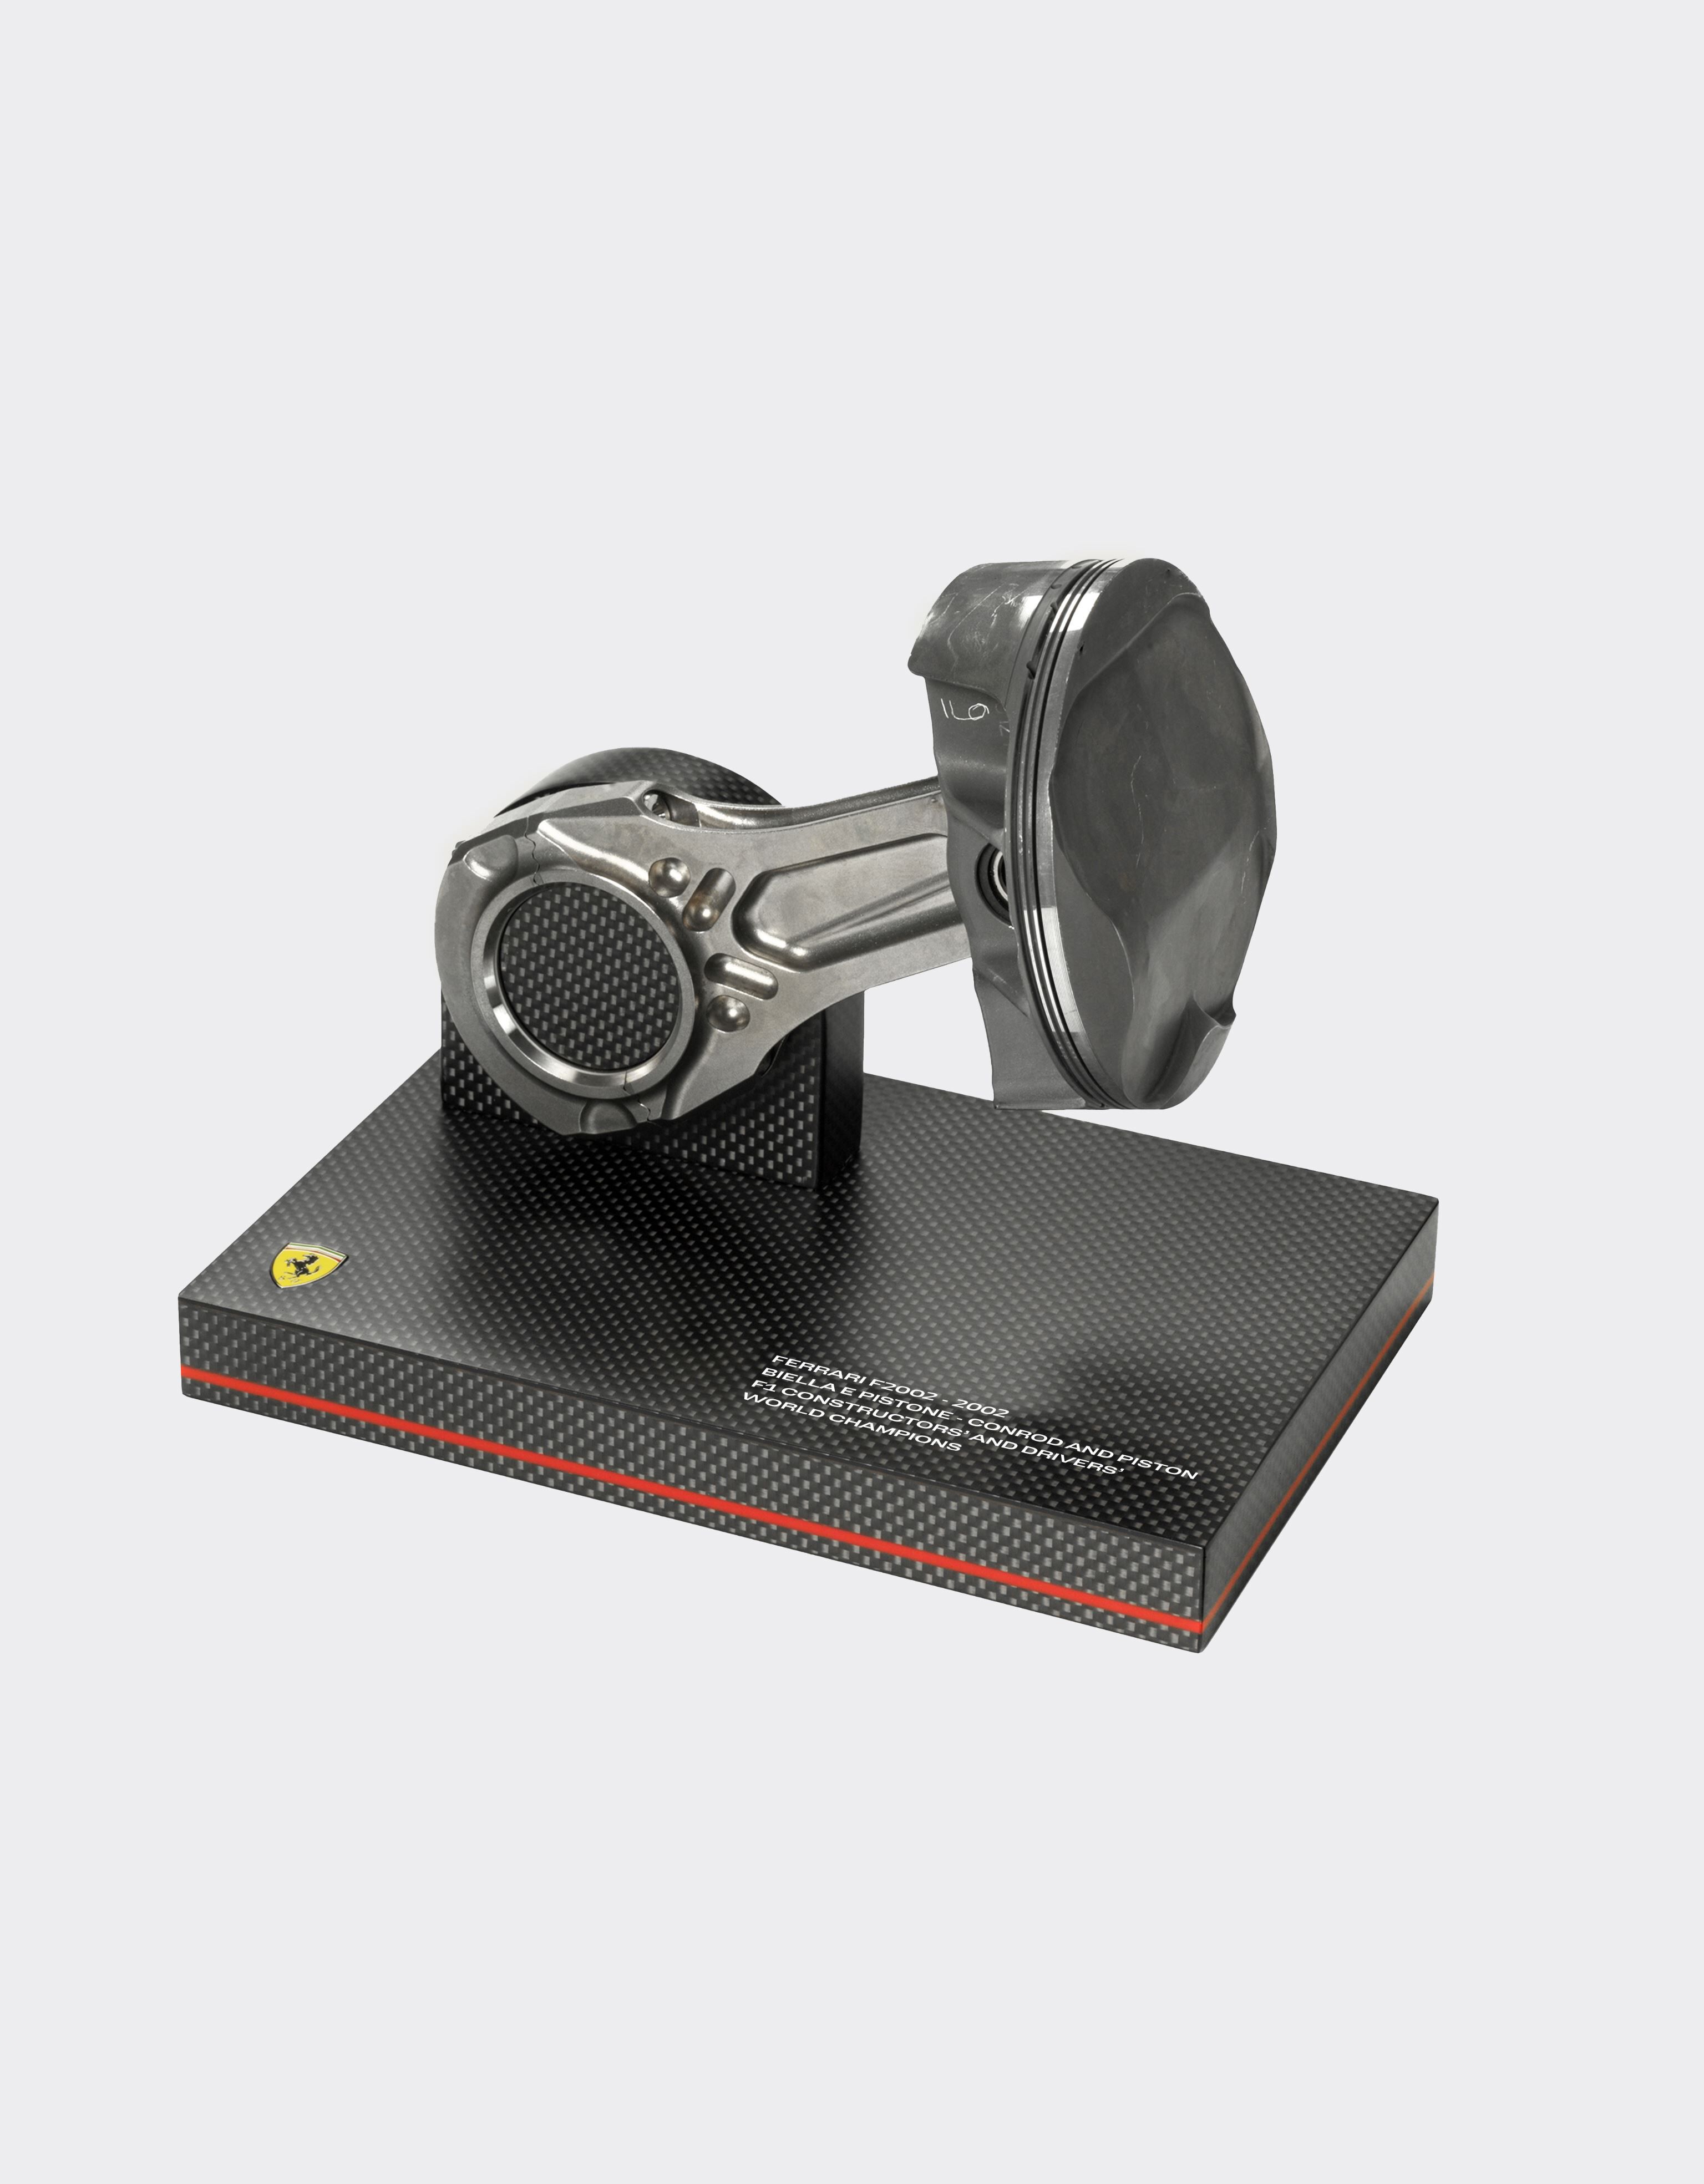 Ferrari Original connecting rod and piston set from the F2002, winner of the 2002 Constructors’ and Drivers’ Championships Rosso Corsa F0883f